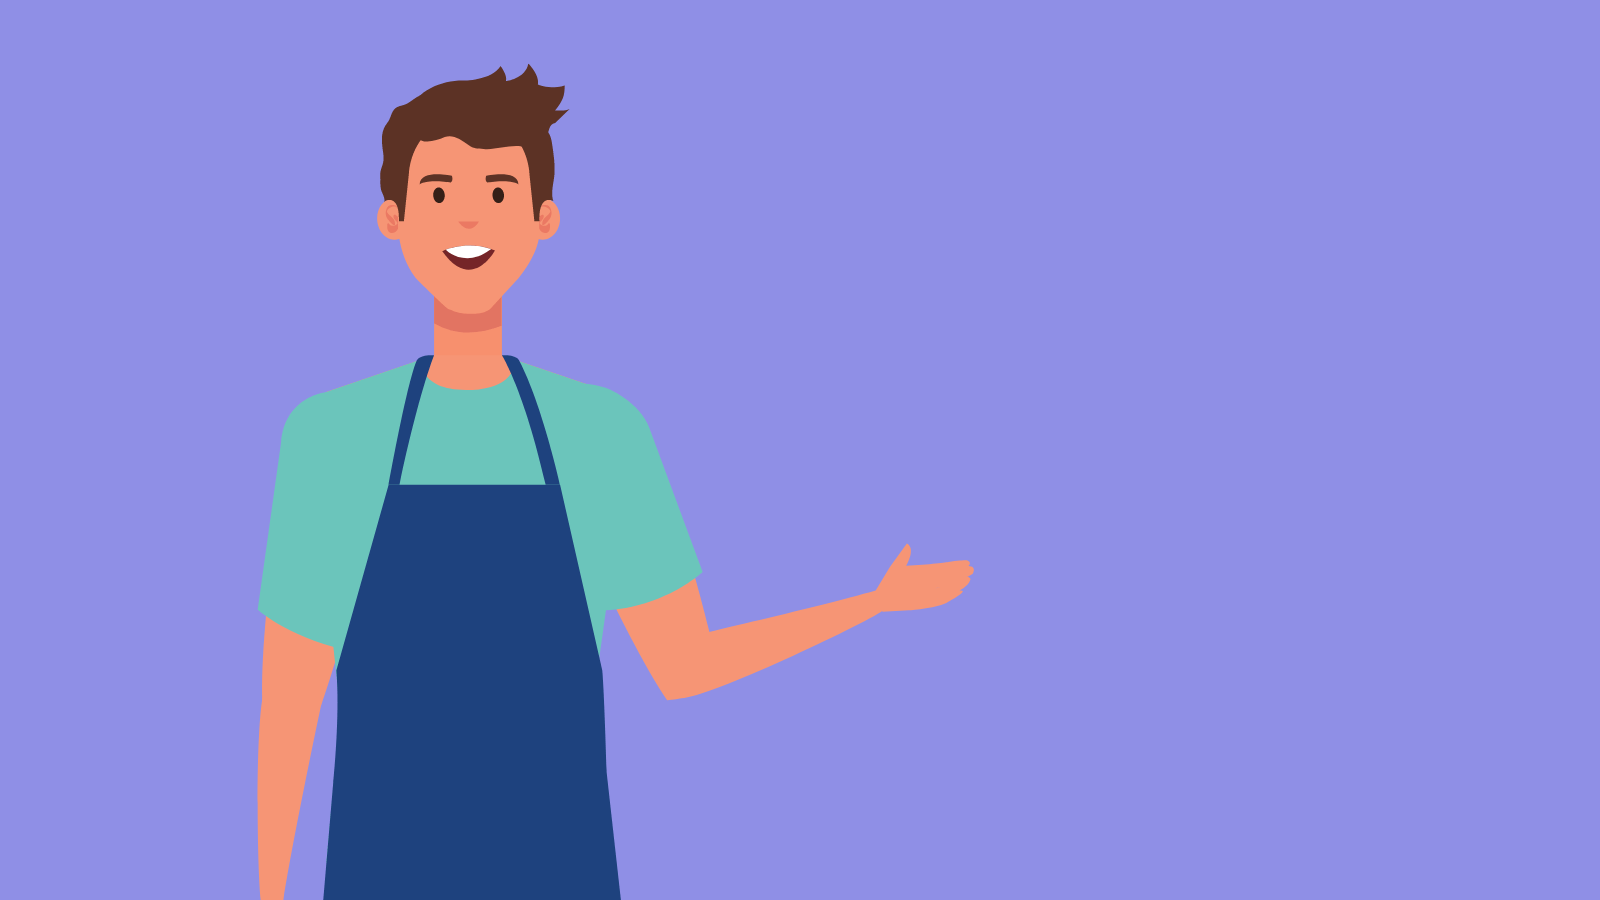 A young man in an apron gesturing at something